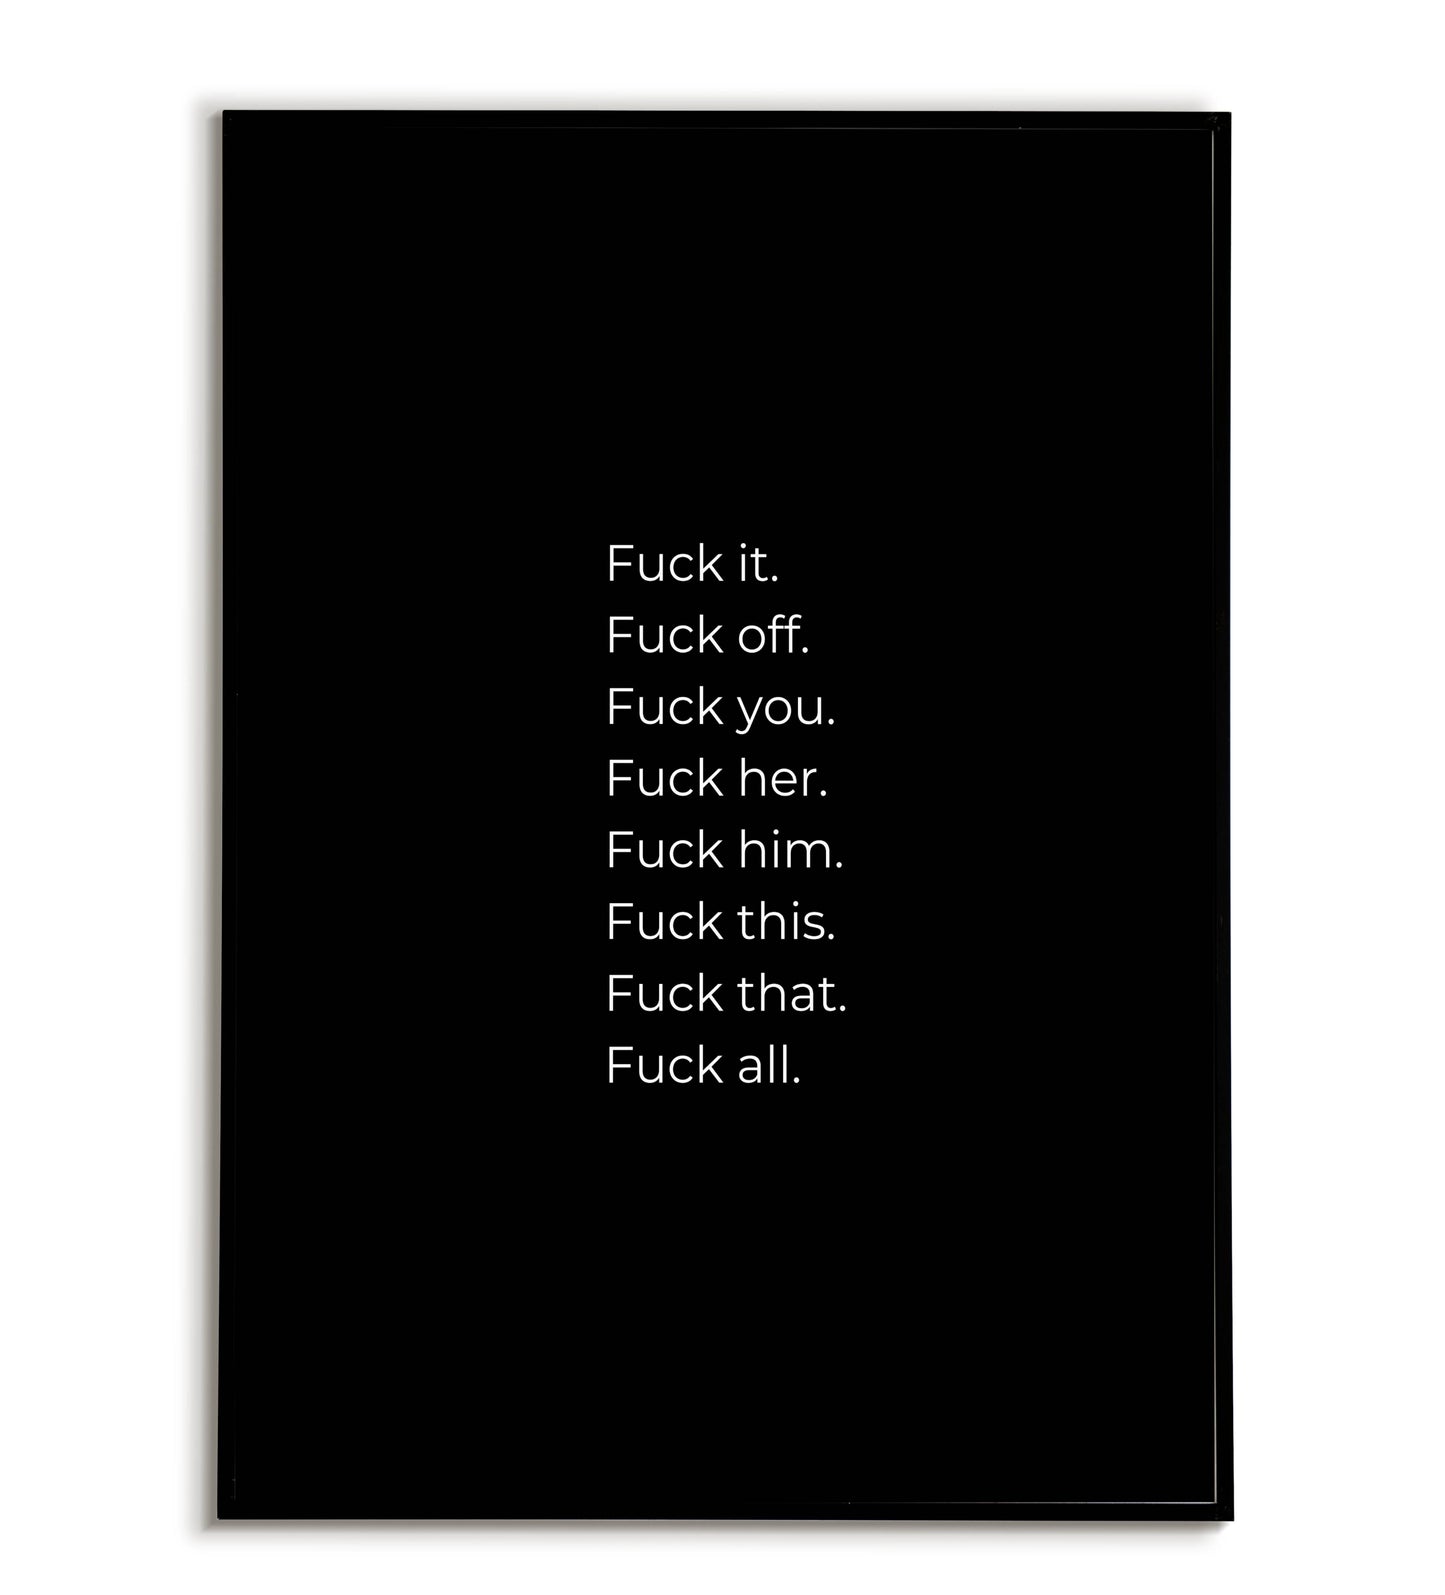 Fuck it, fuck off, fuck you..." typographic typography poster with strong language